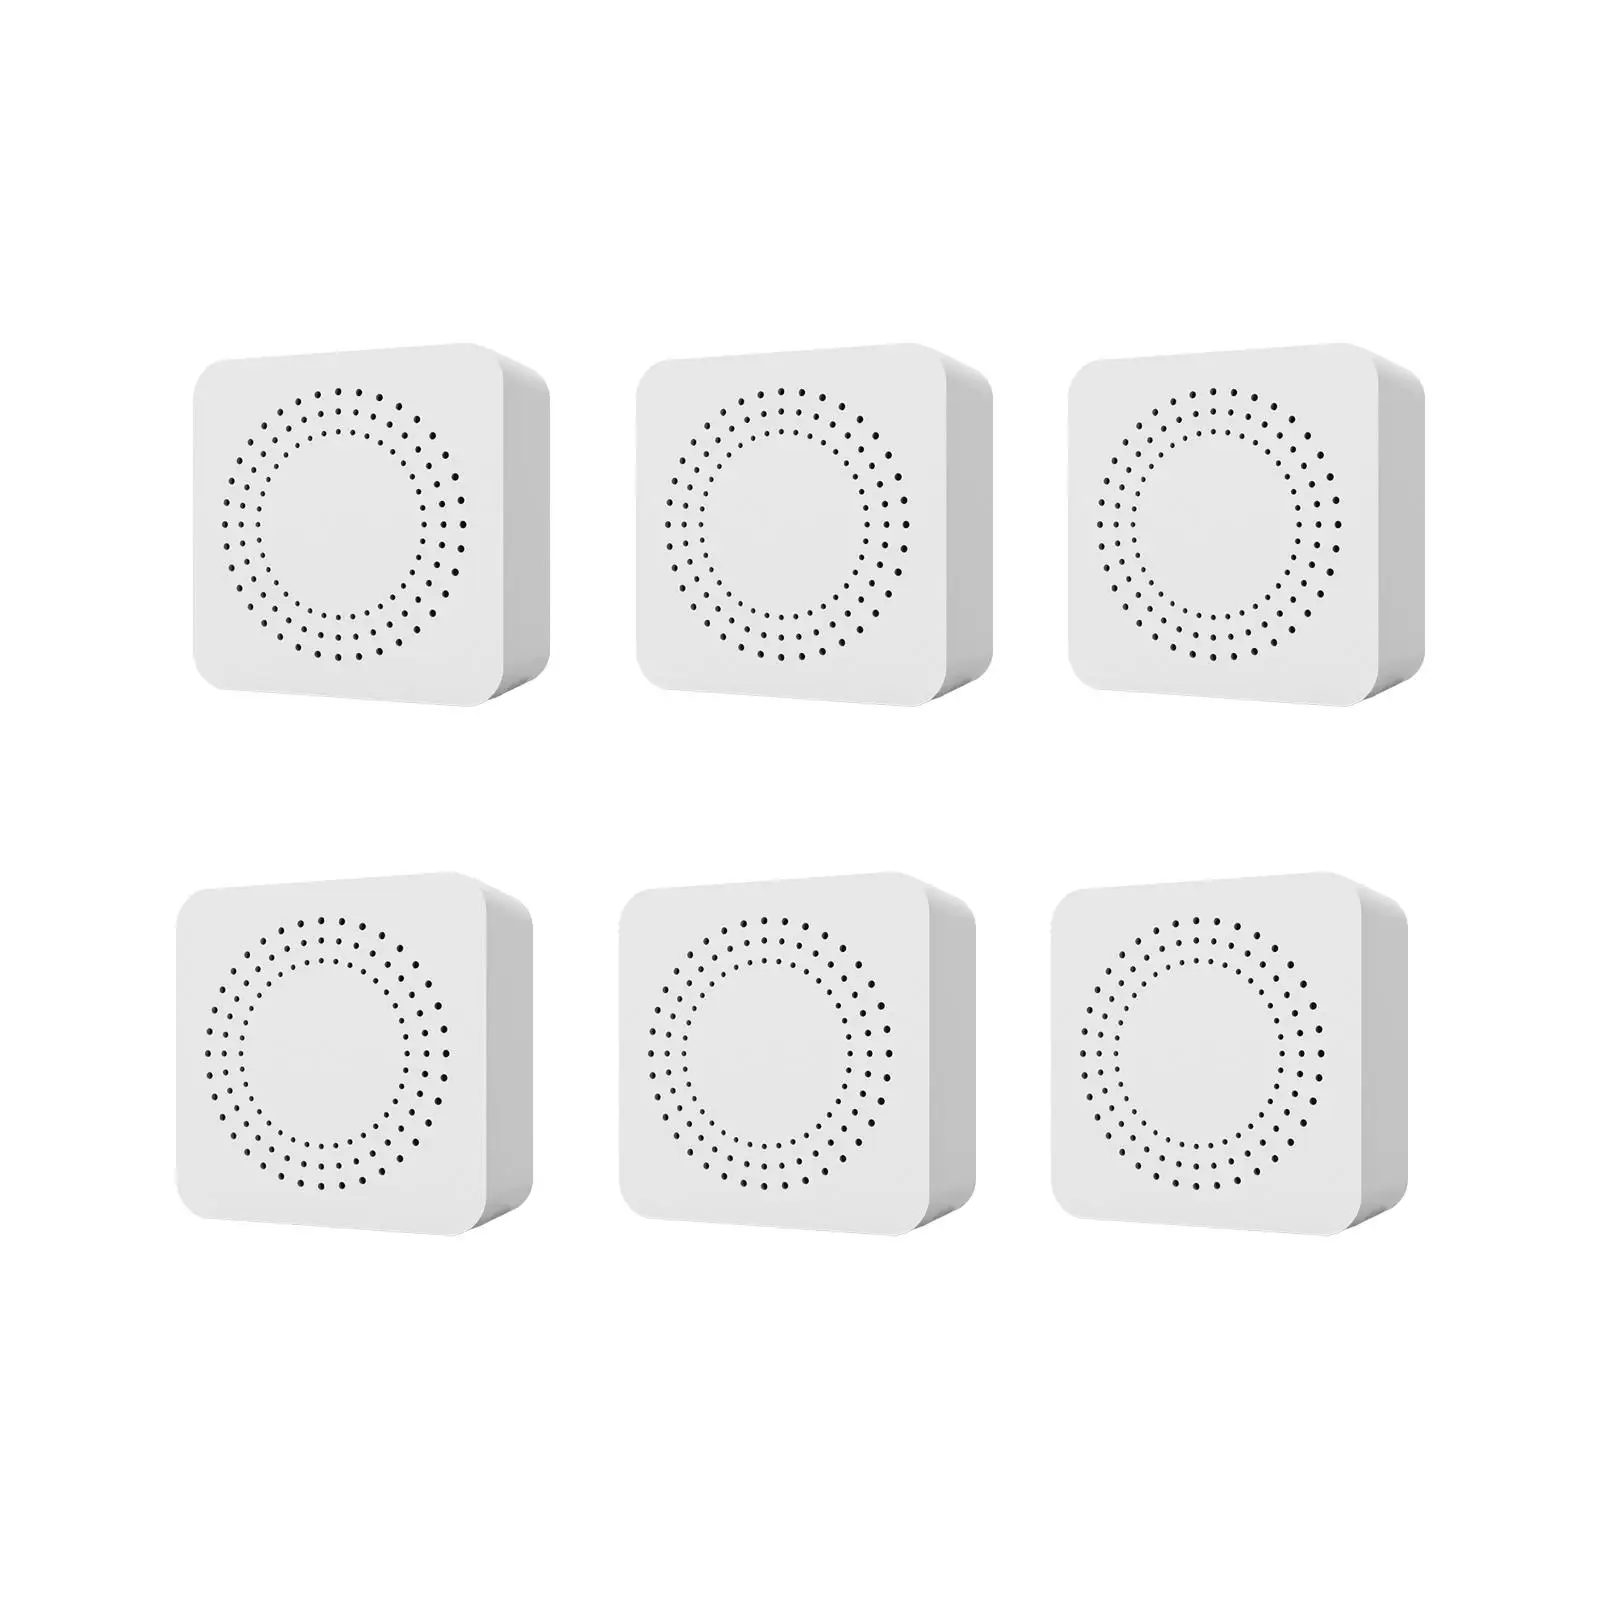 Mini Smart Switch Voice Control Timing Smart Switch Lighting Switches DIY Light Switches for Bedroom Office Living Room